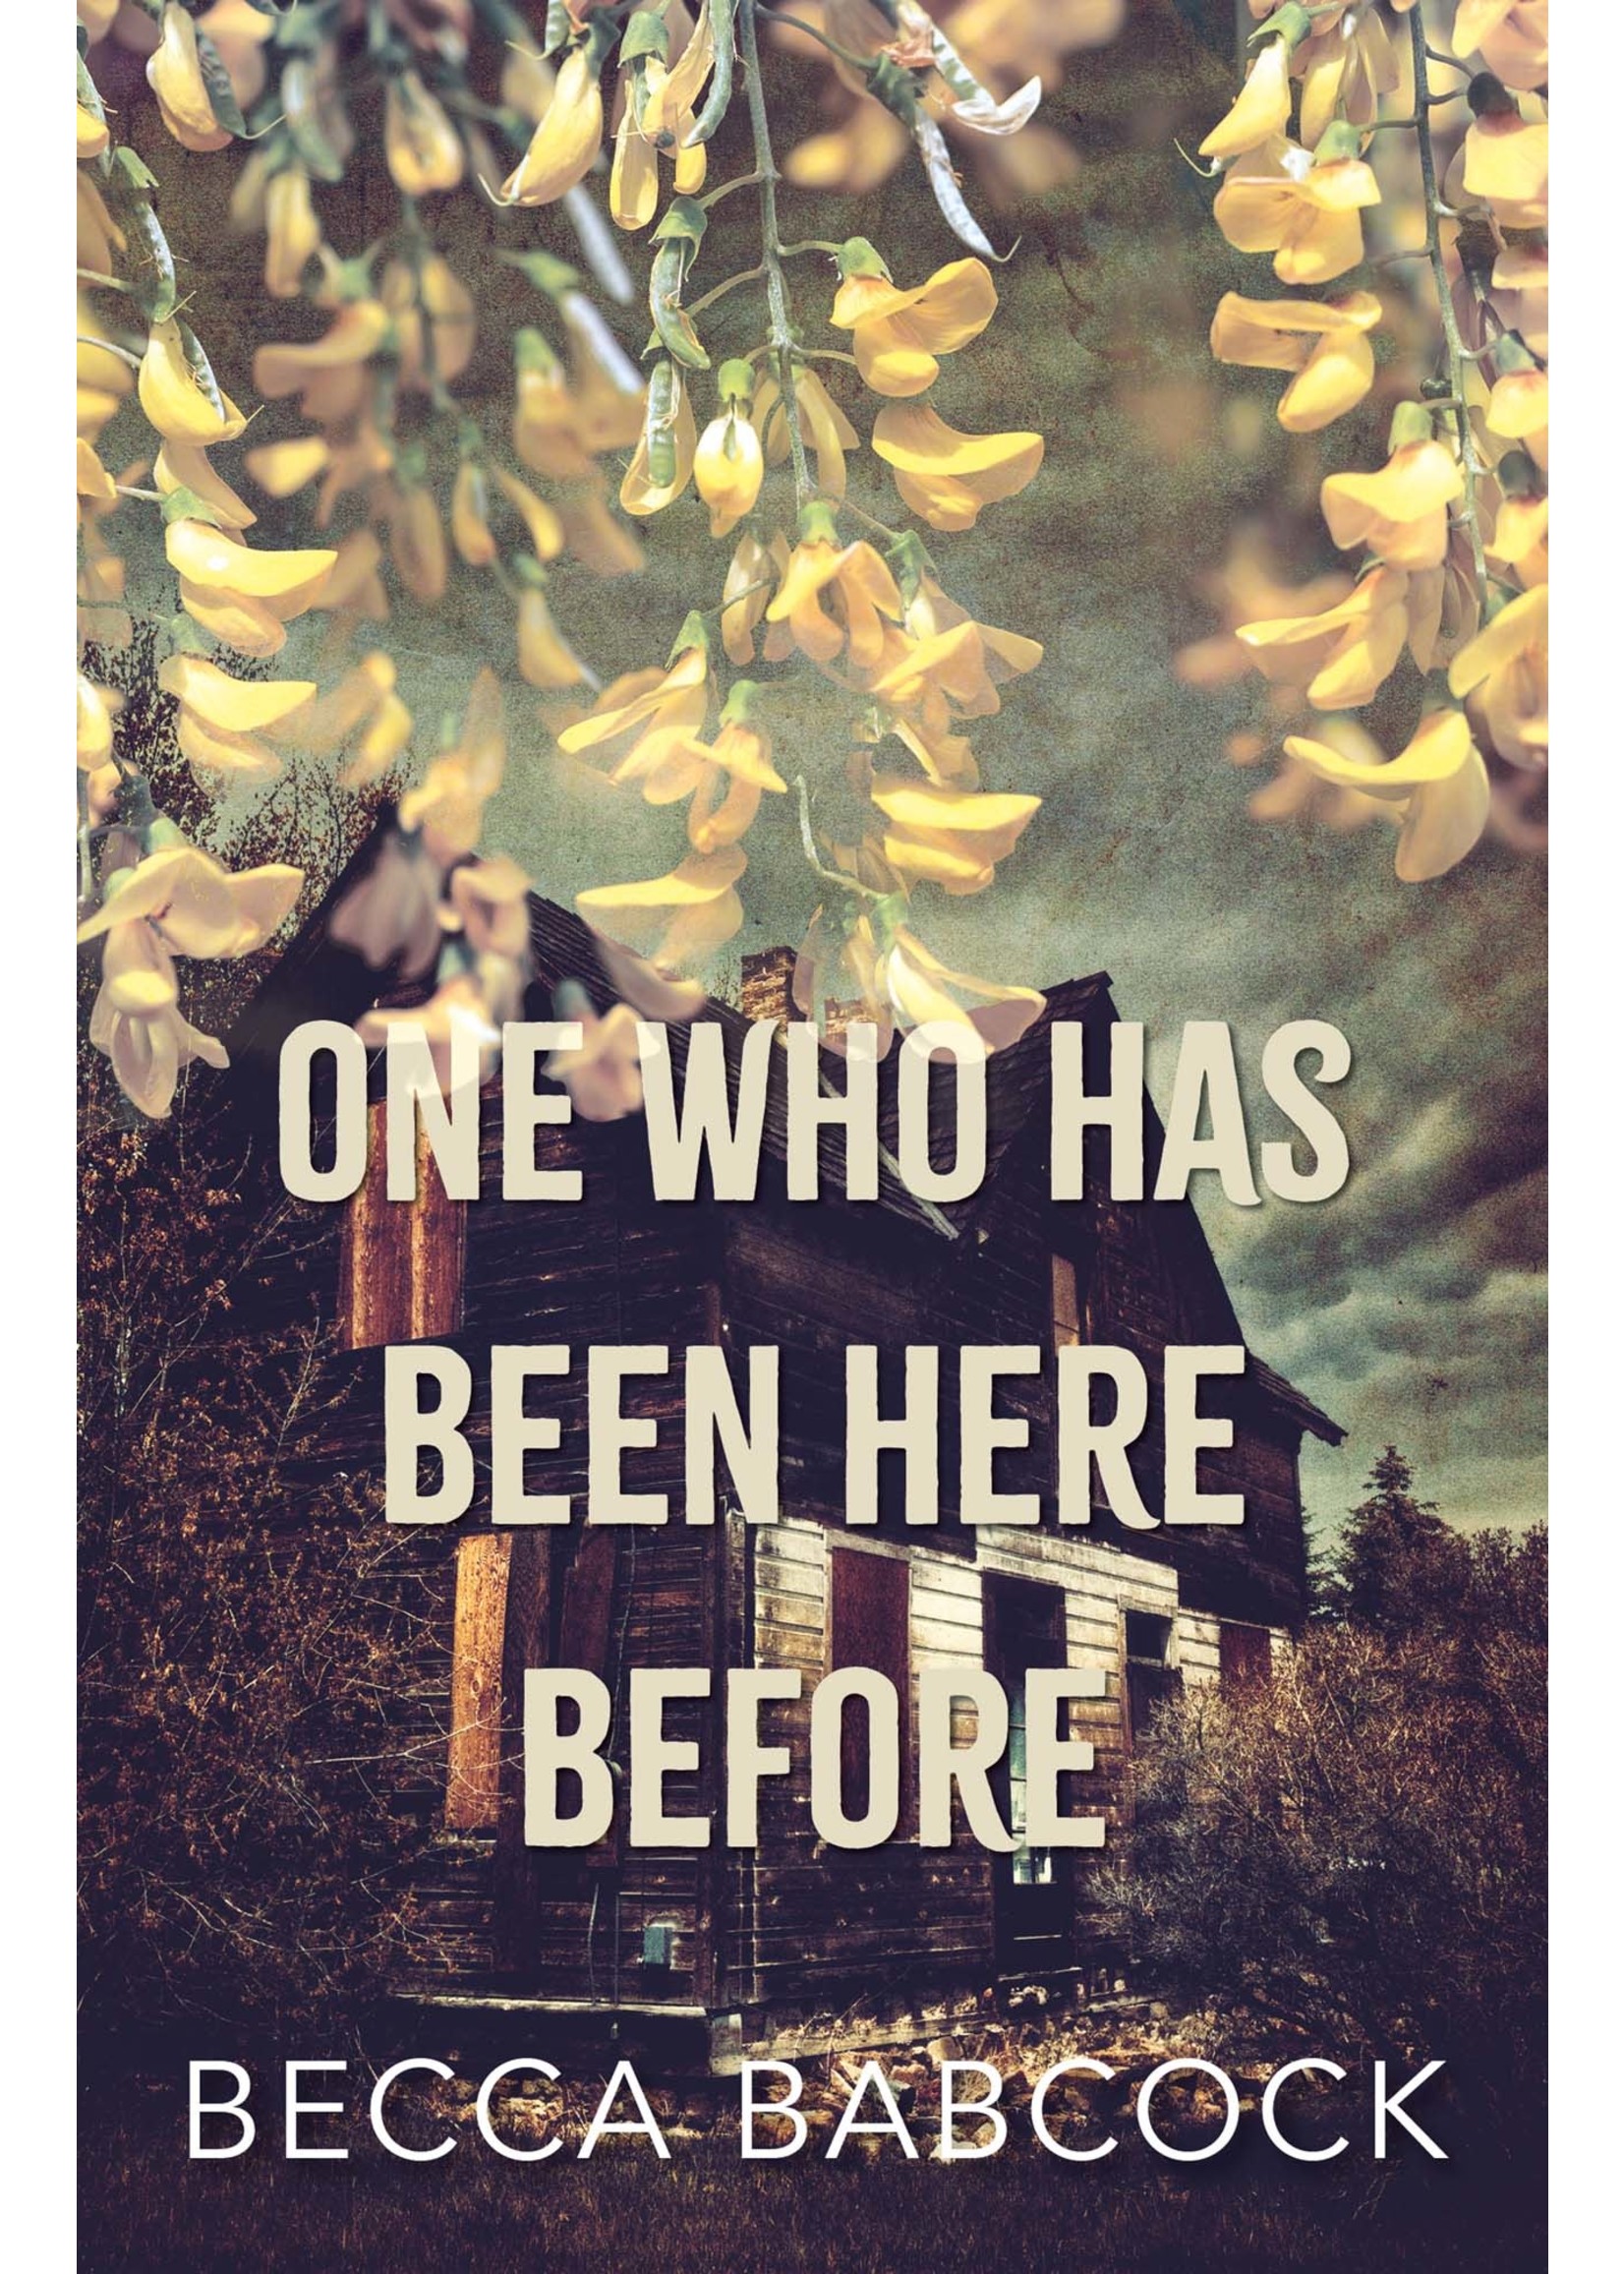 One Who Has Been Here Before by Rebecca Babcock